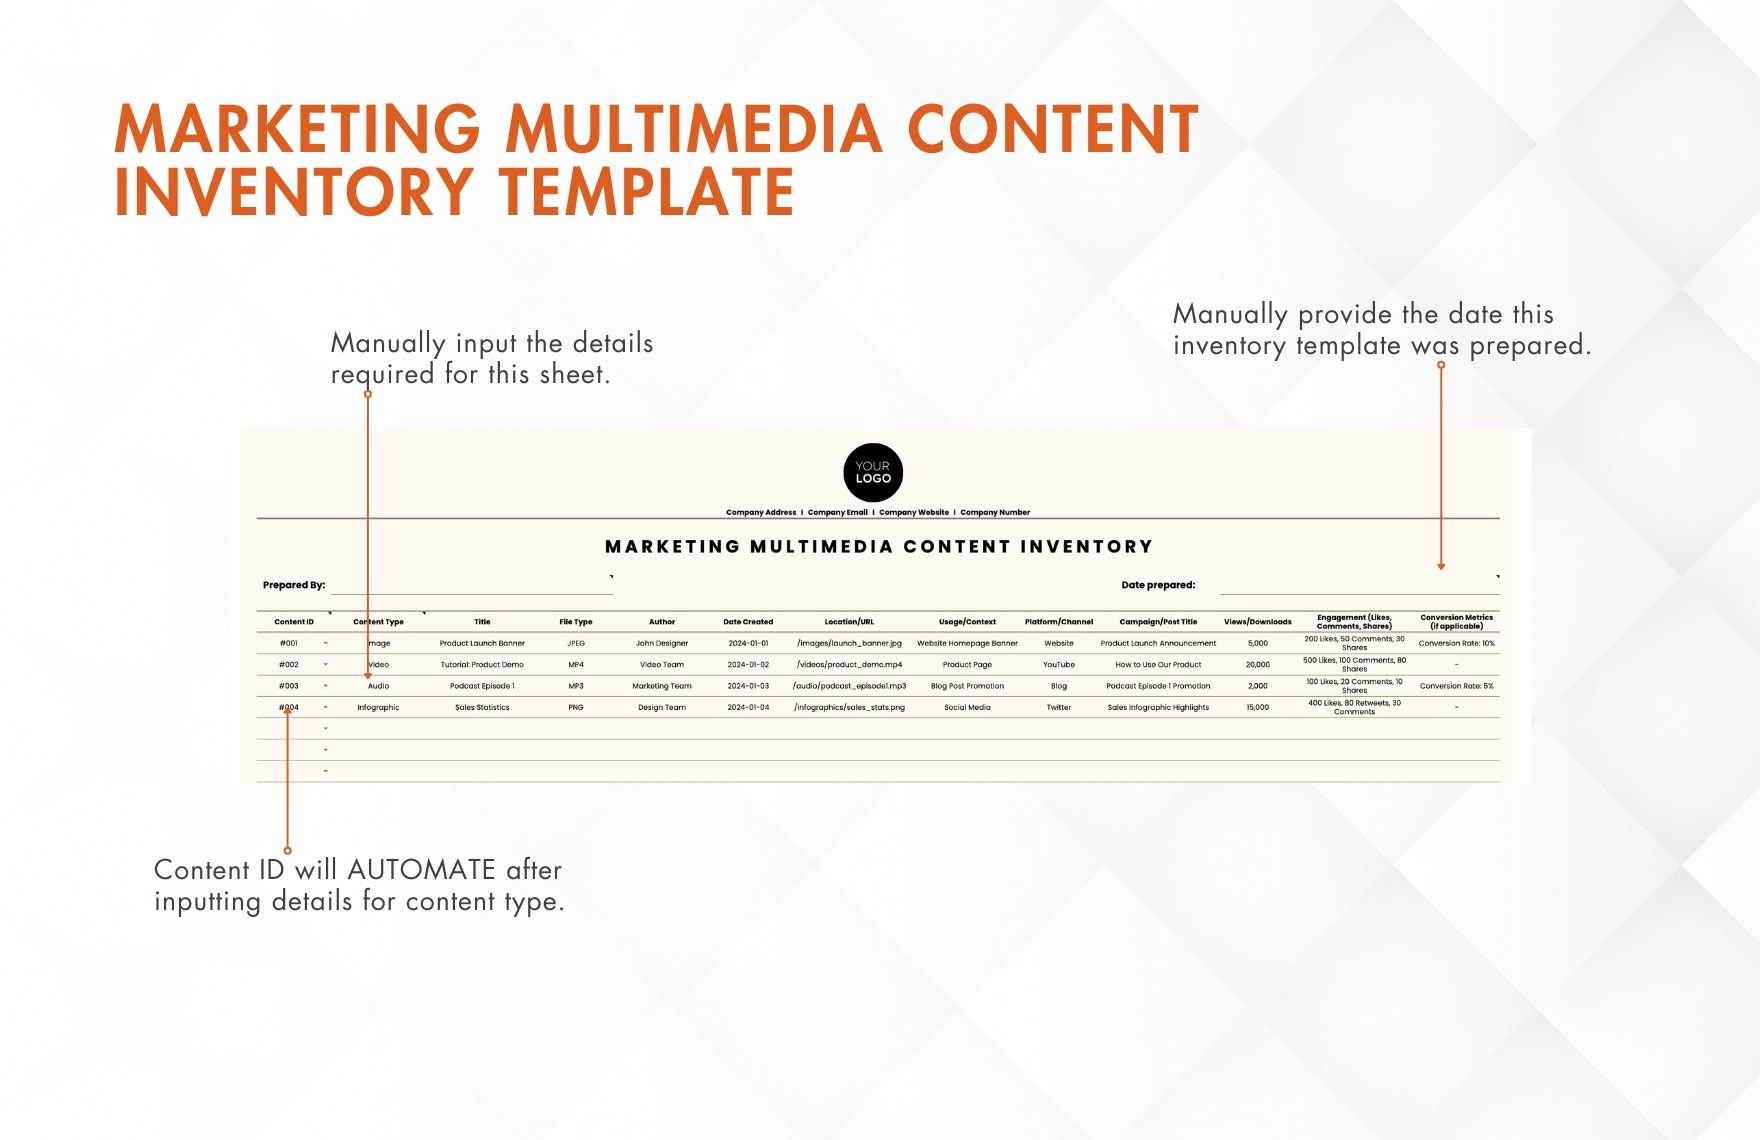 Marketing Multimedia Content Inventory Template